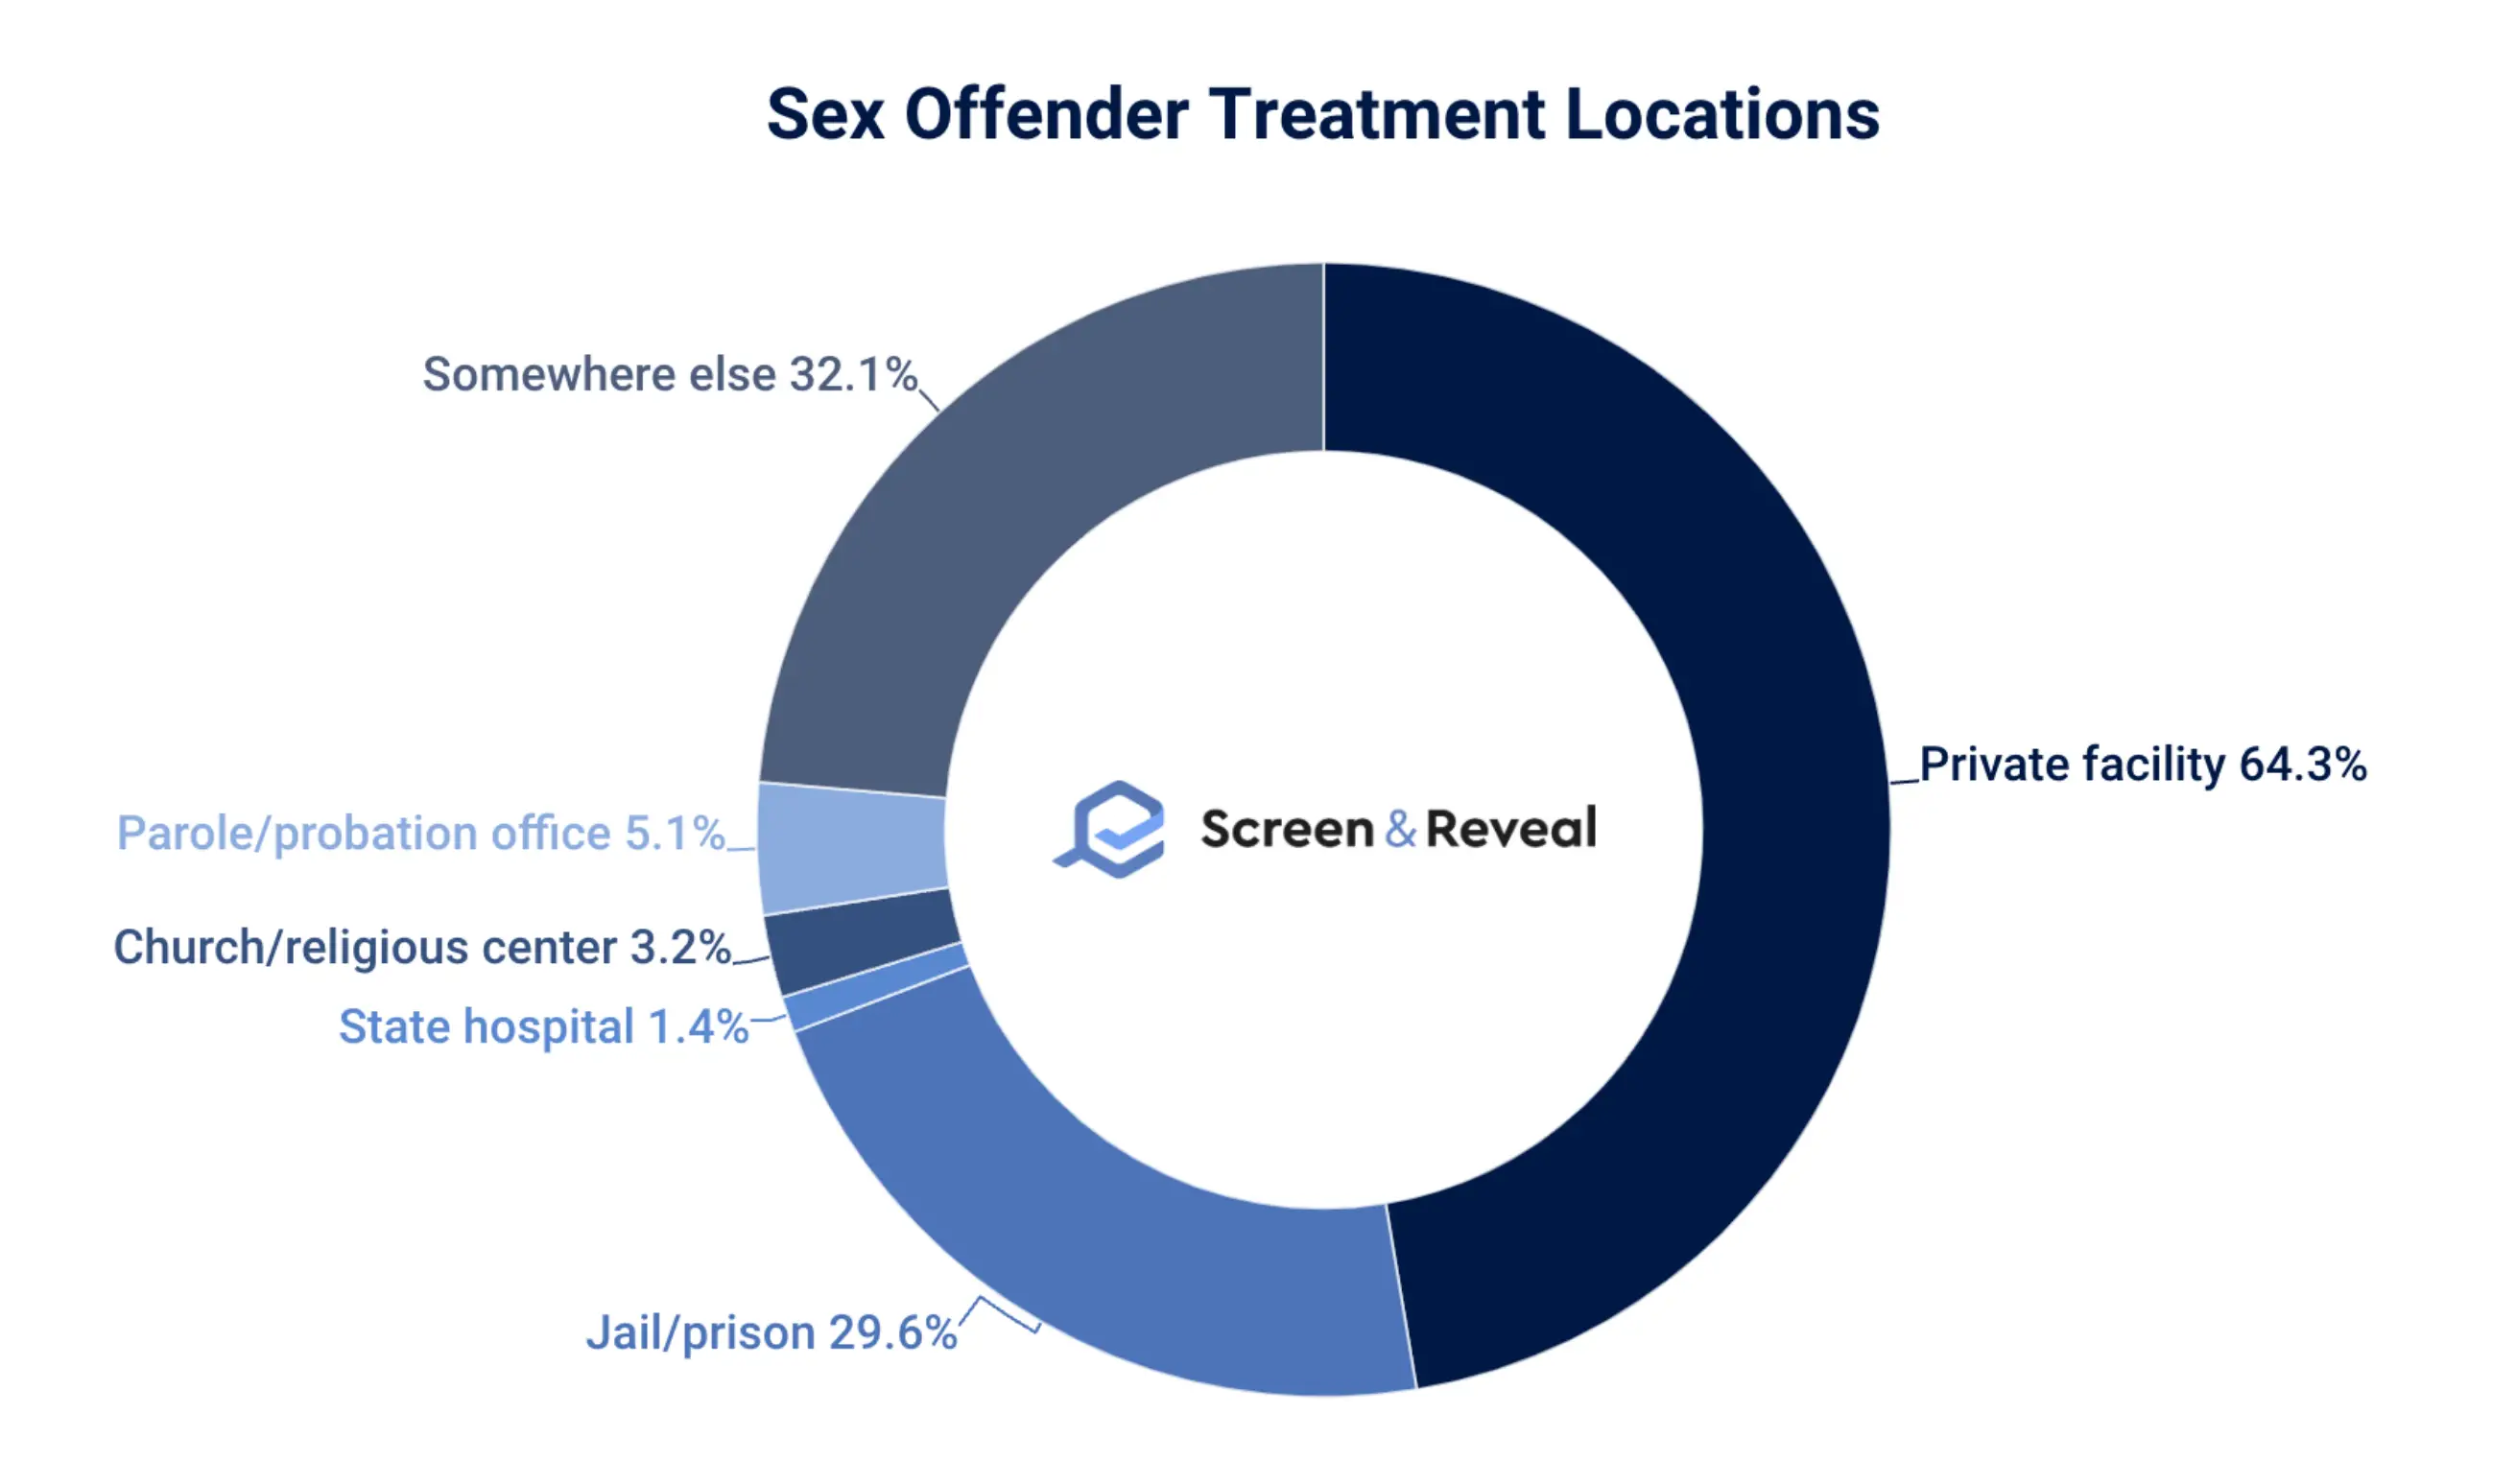 Sex Offender Treatment Locations